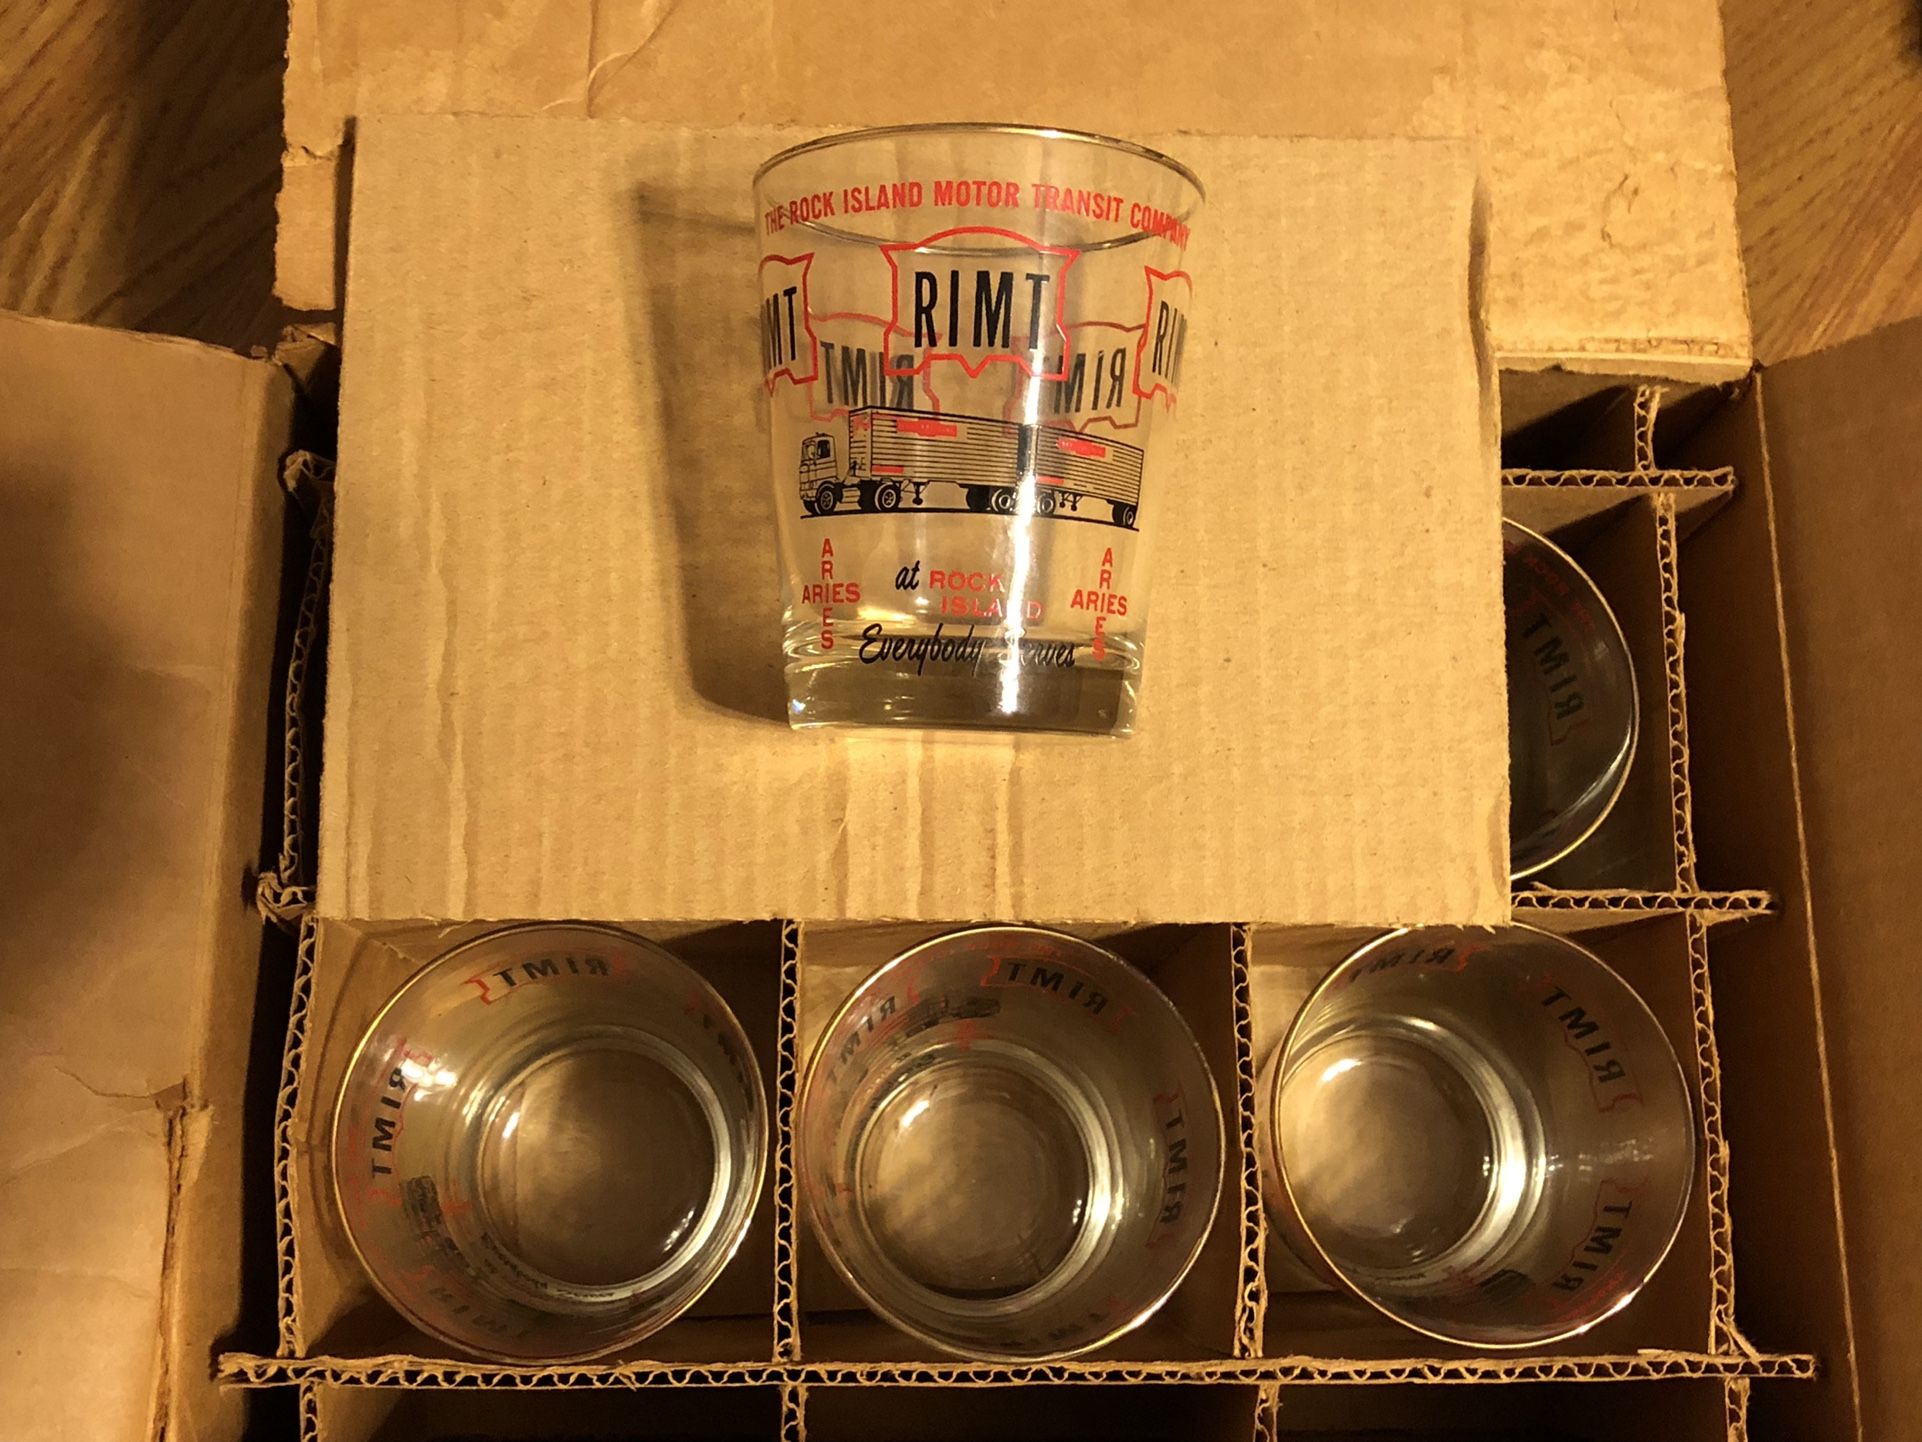 Case Of Vintage 1970 Brand New RIMT ROCK ISLAND Illinois Motor Transit. 18 Wheeler With Cab Rock Glasses. $40.00 For All